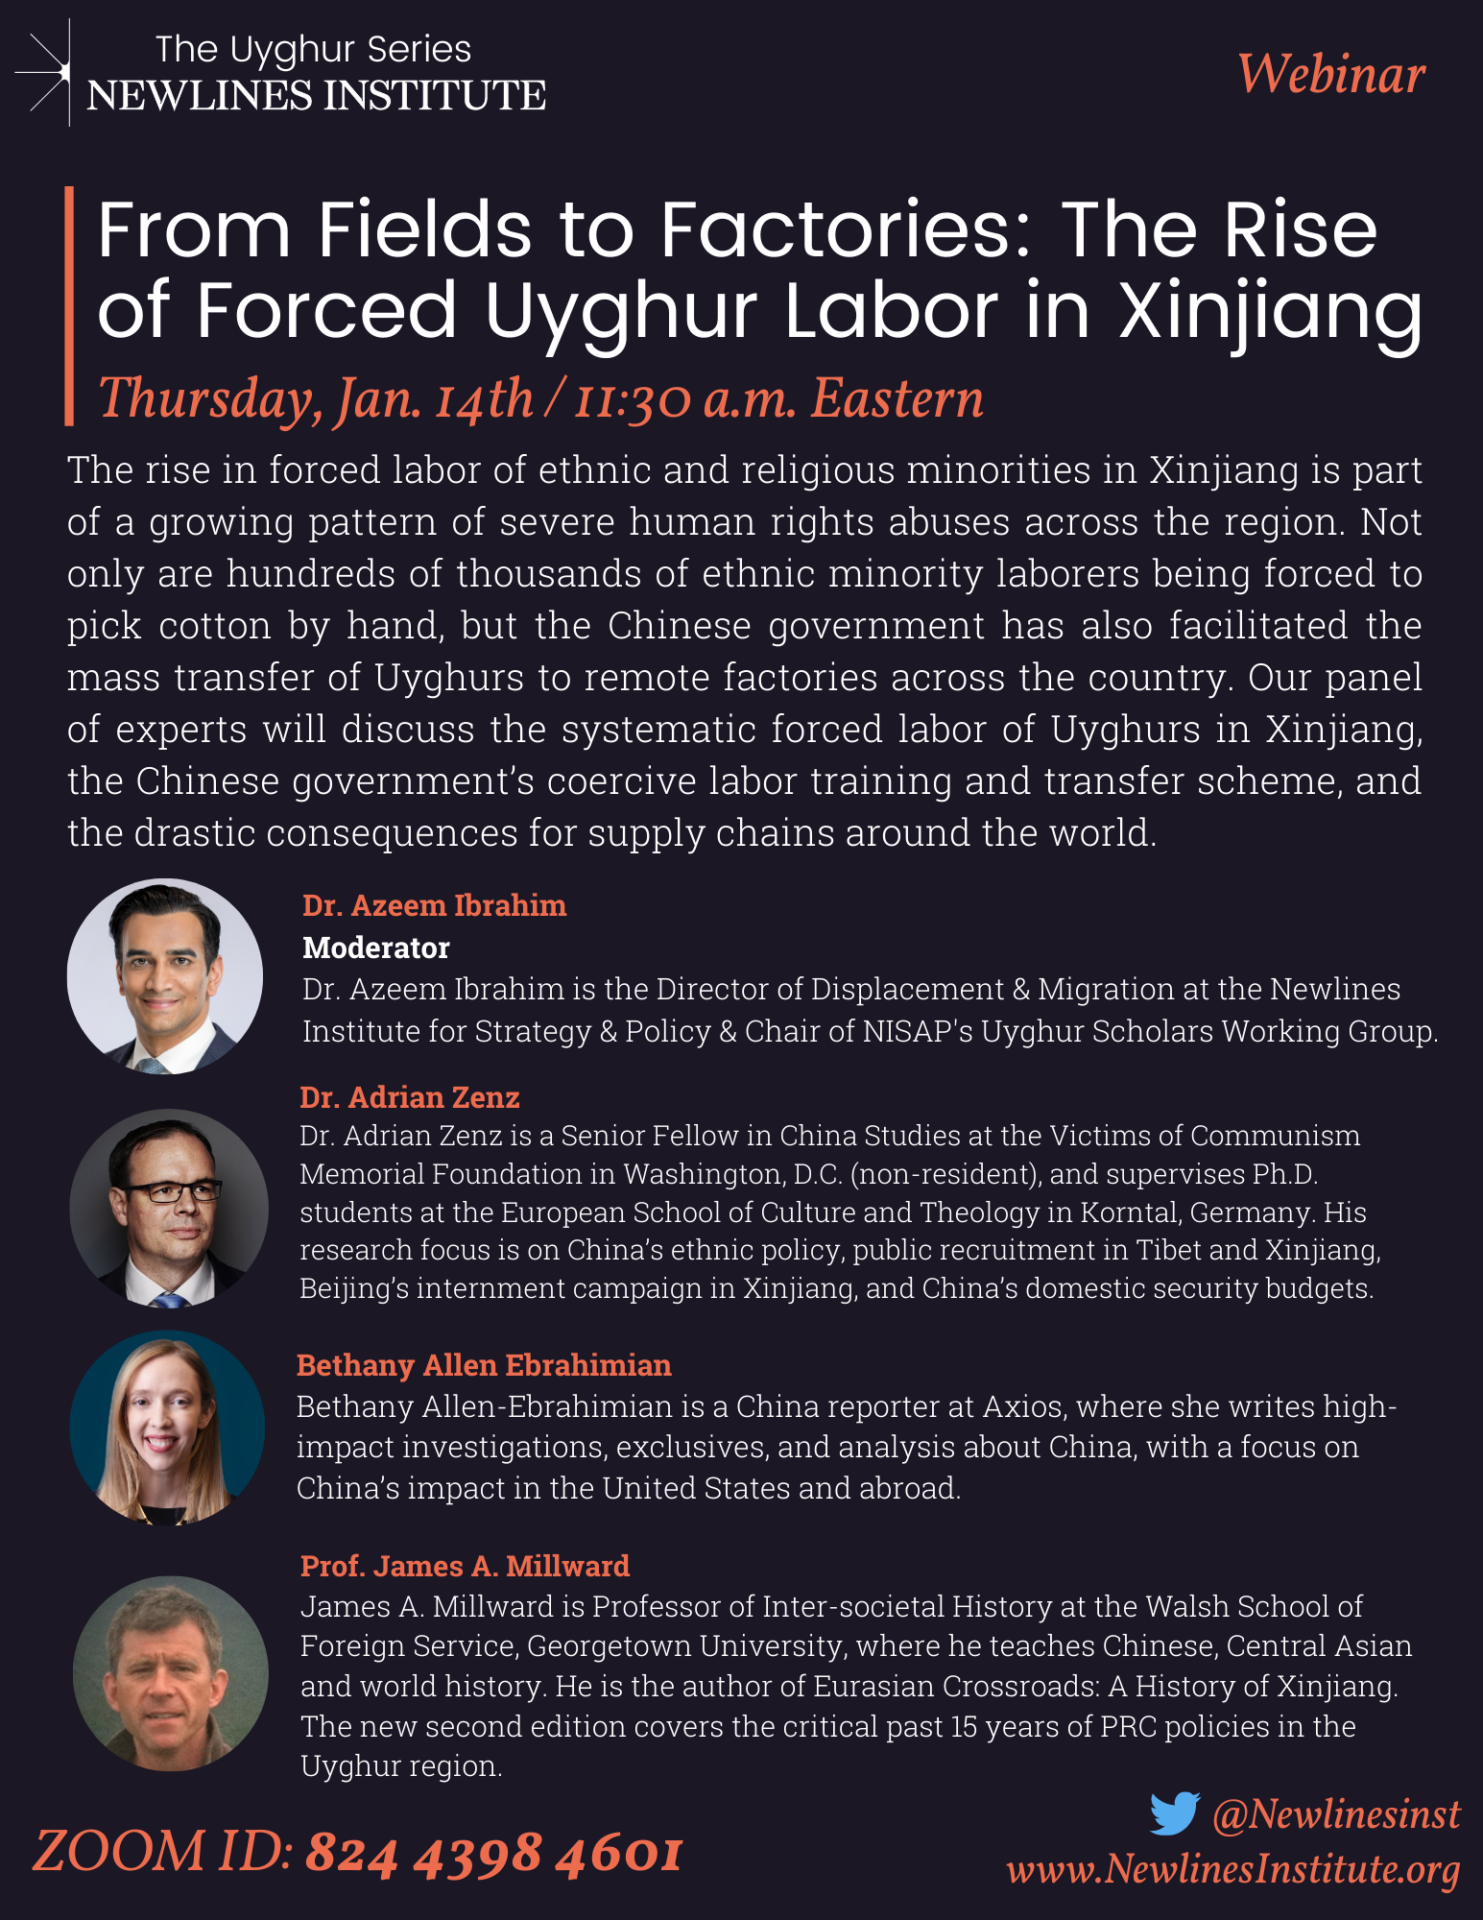 From Fields to Factories: The Rise of Forced Uyghur Labor in Xinjiang